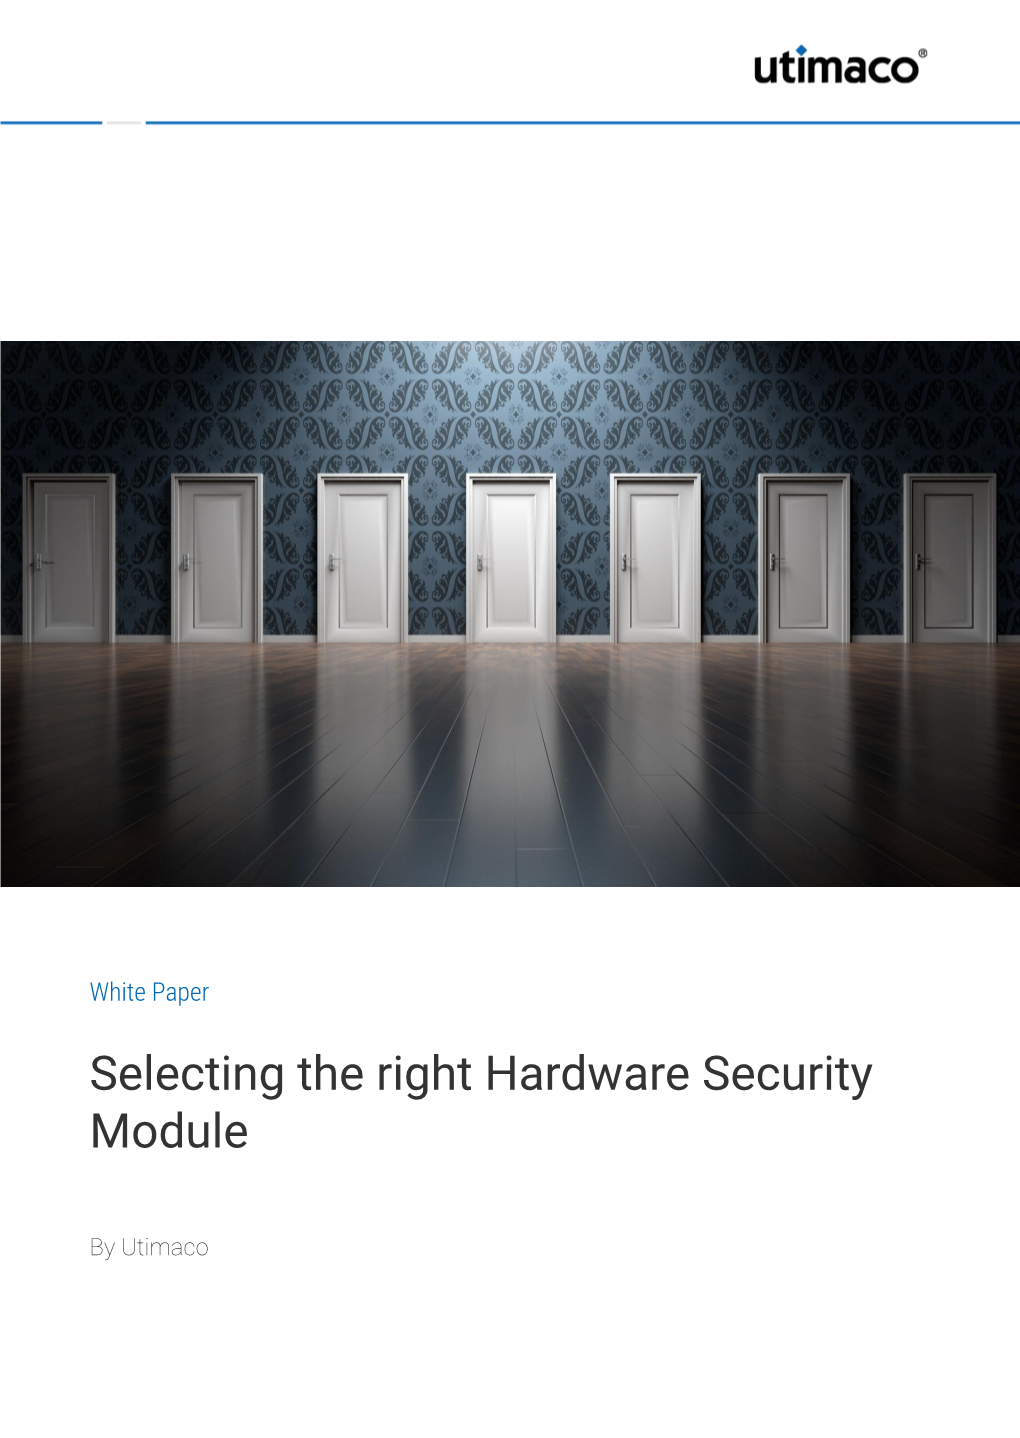 Selecting the Right Hardware Security Module